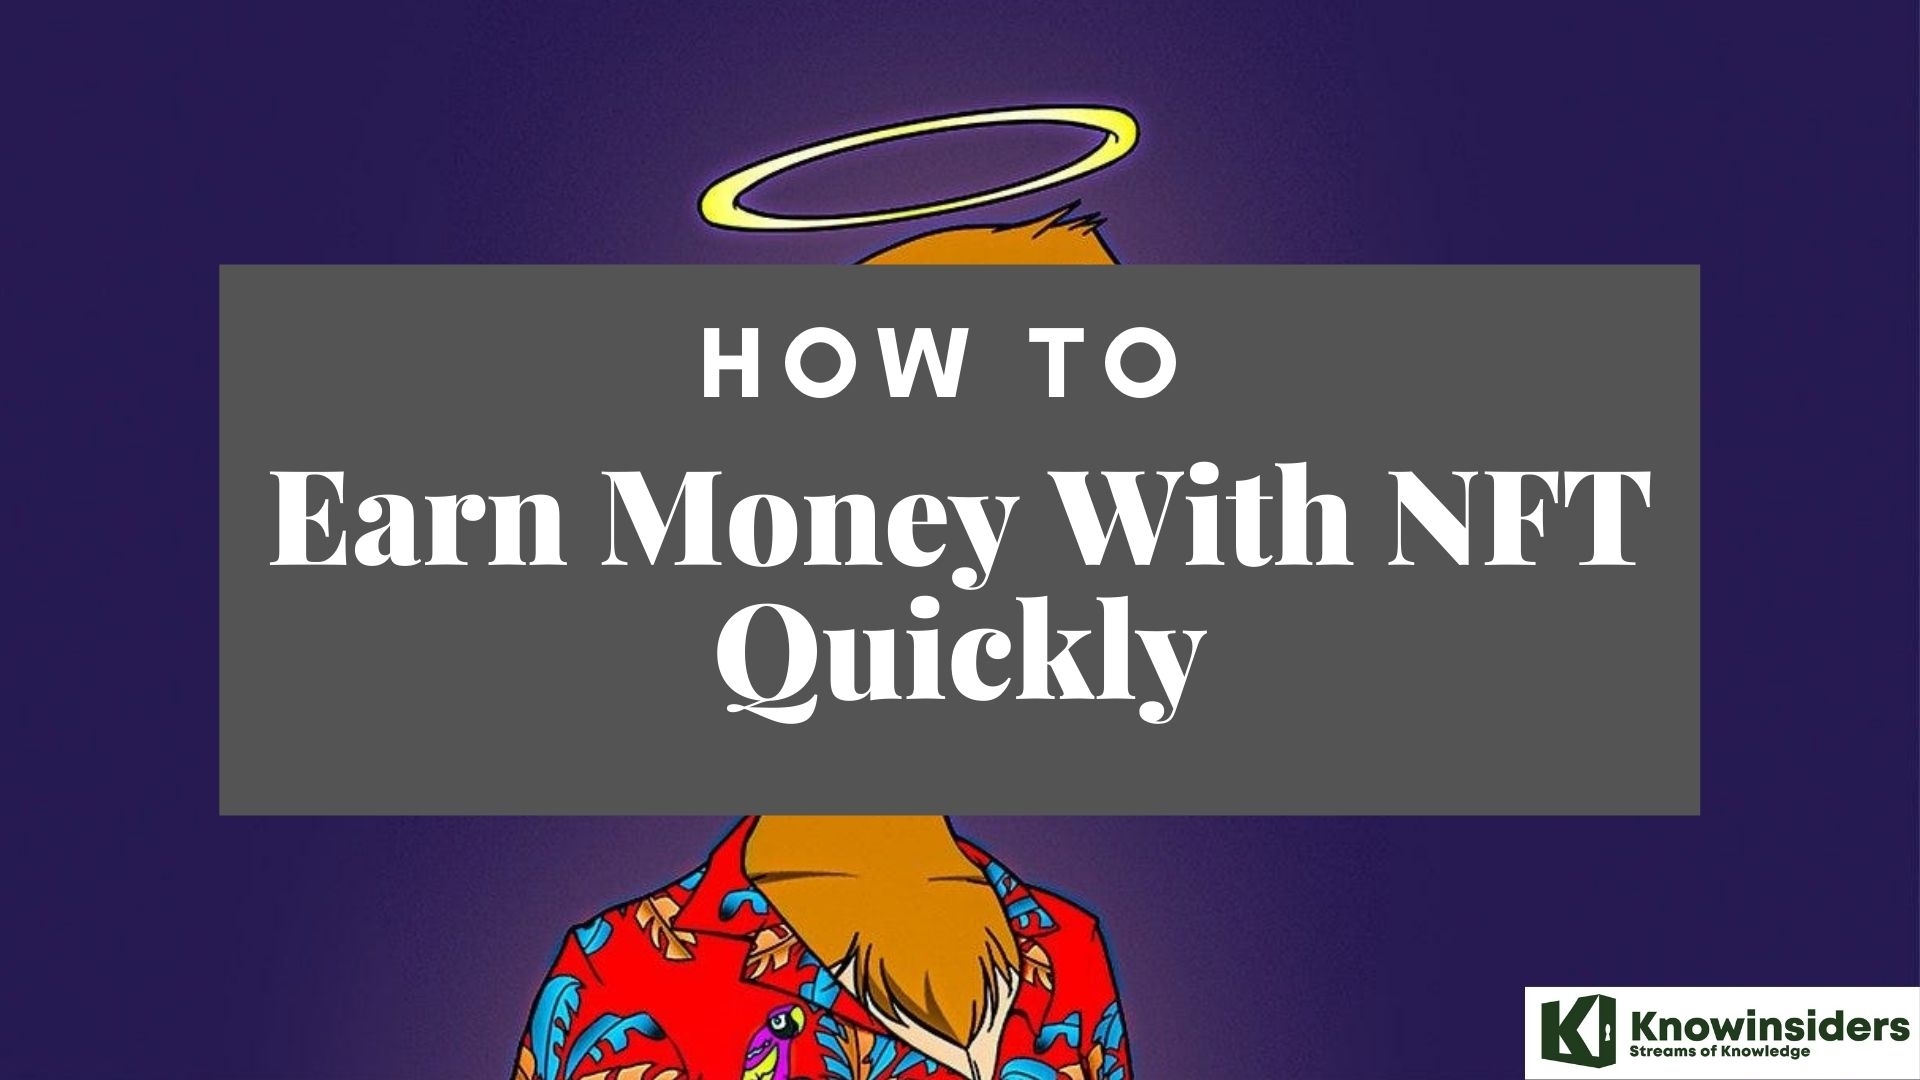 How To Earn Money With NFT Quickly